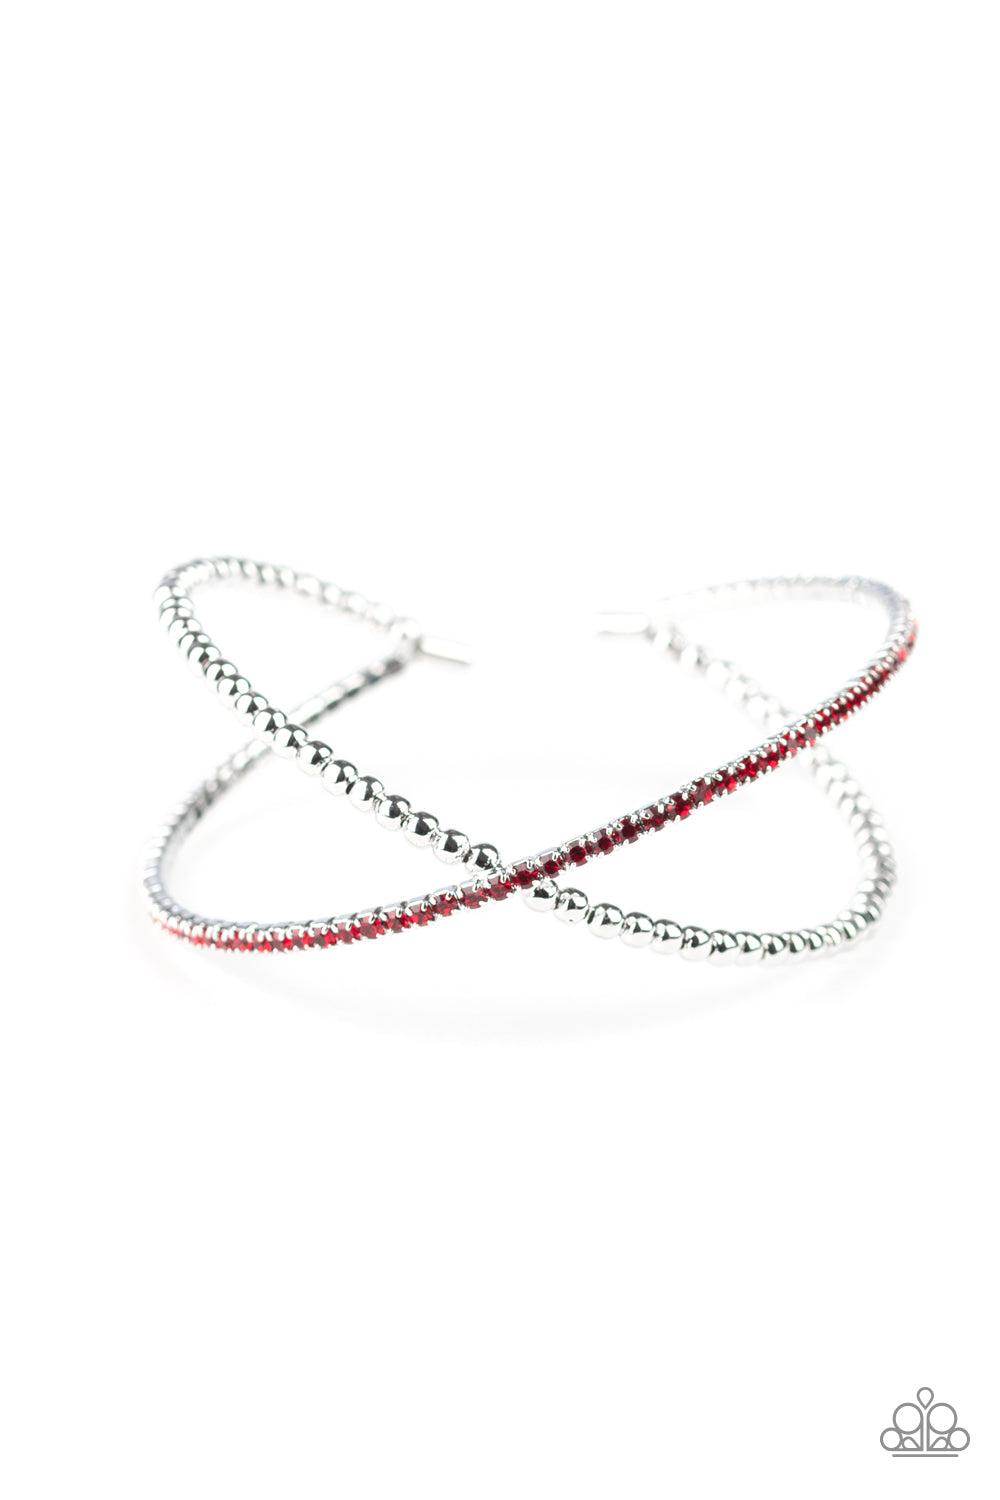 Chicly Crisscrossed - red - Paparazzi bracelet